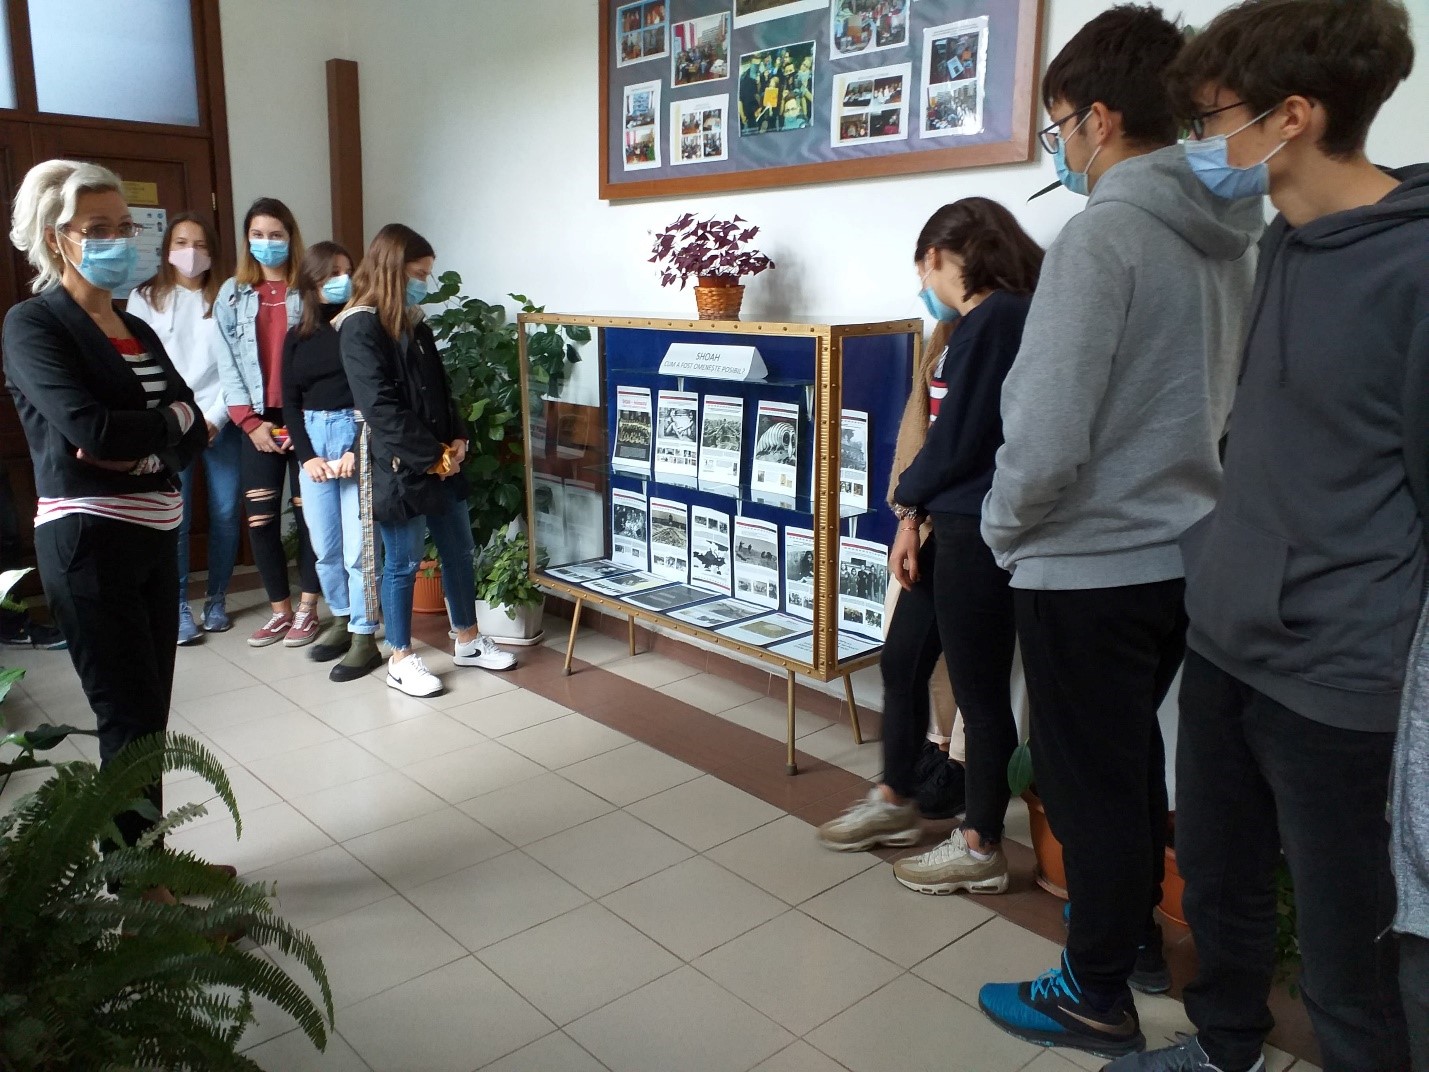 International Water Day and Earth Day celebrated at the ”Toma Socolescu” High School in Ploiești